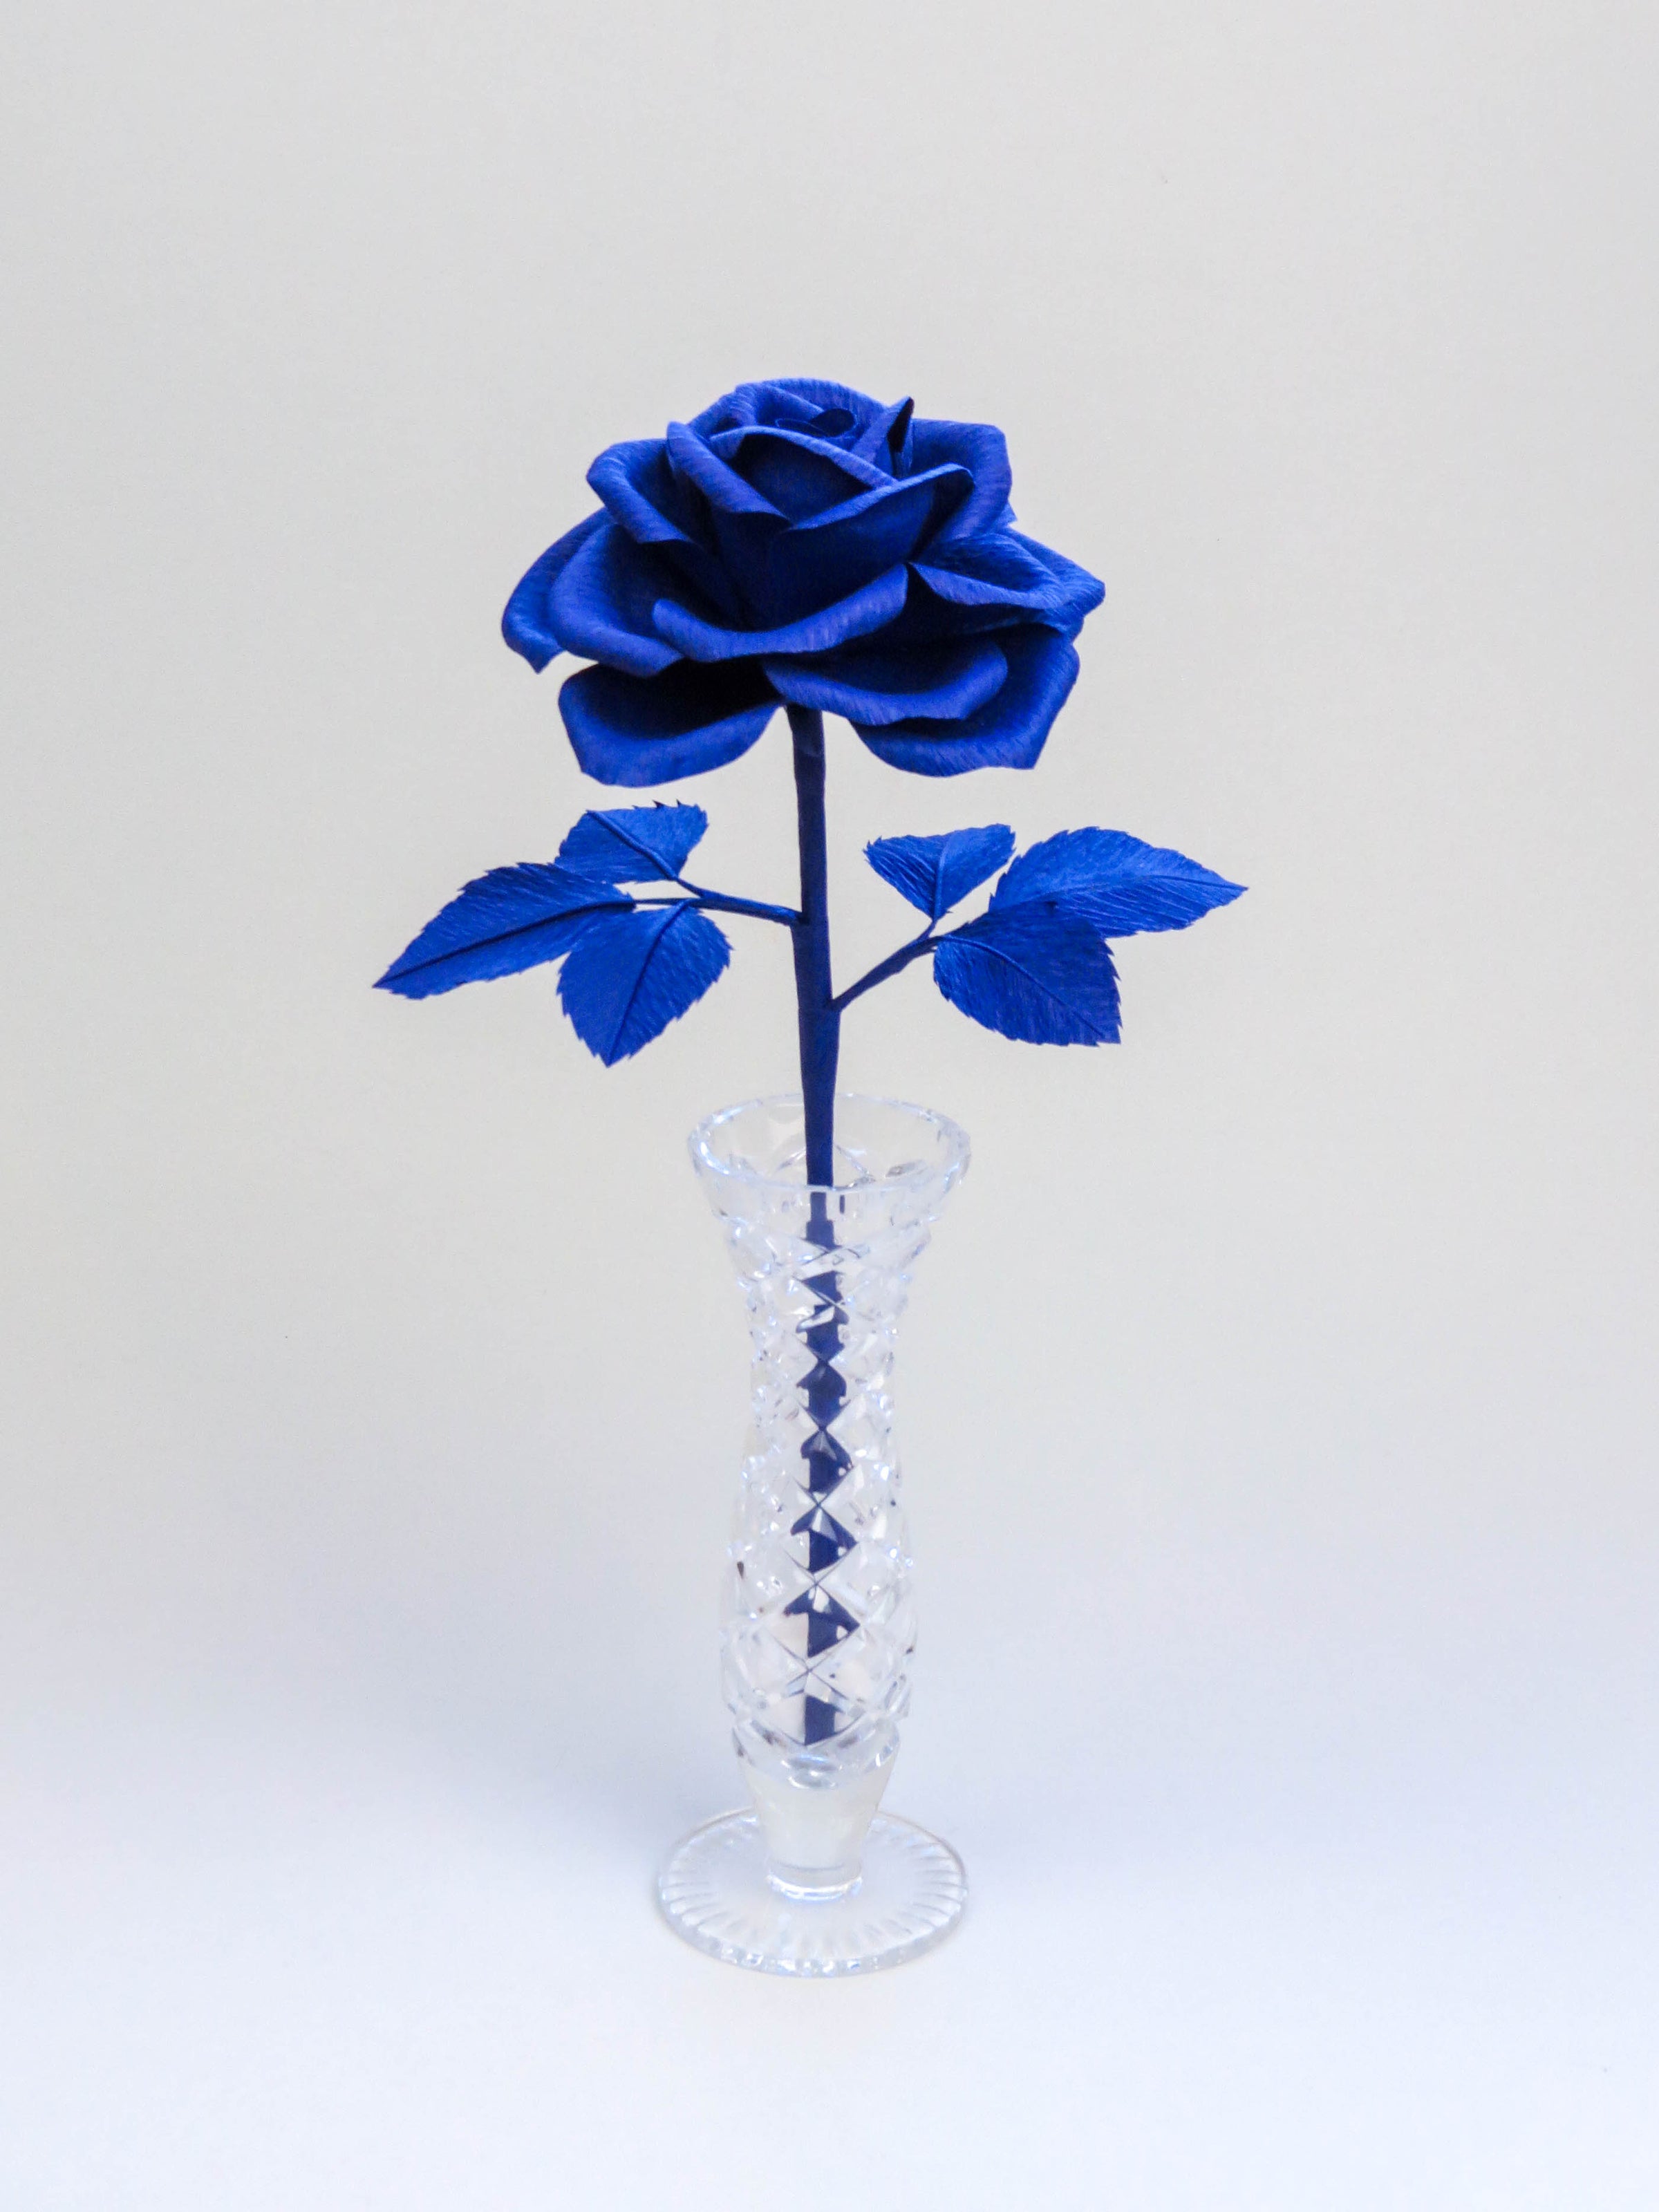 Sapphire blue crepe paper rose with six sapphire blue leaves standing in a narrow glass vase set against a light grey background